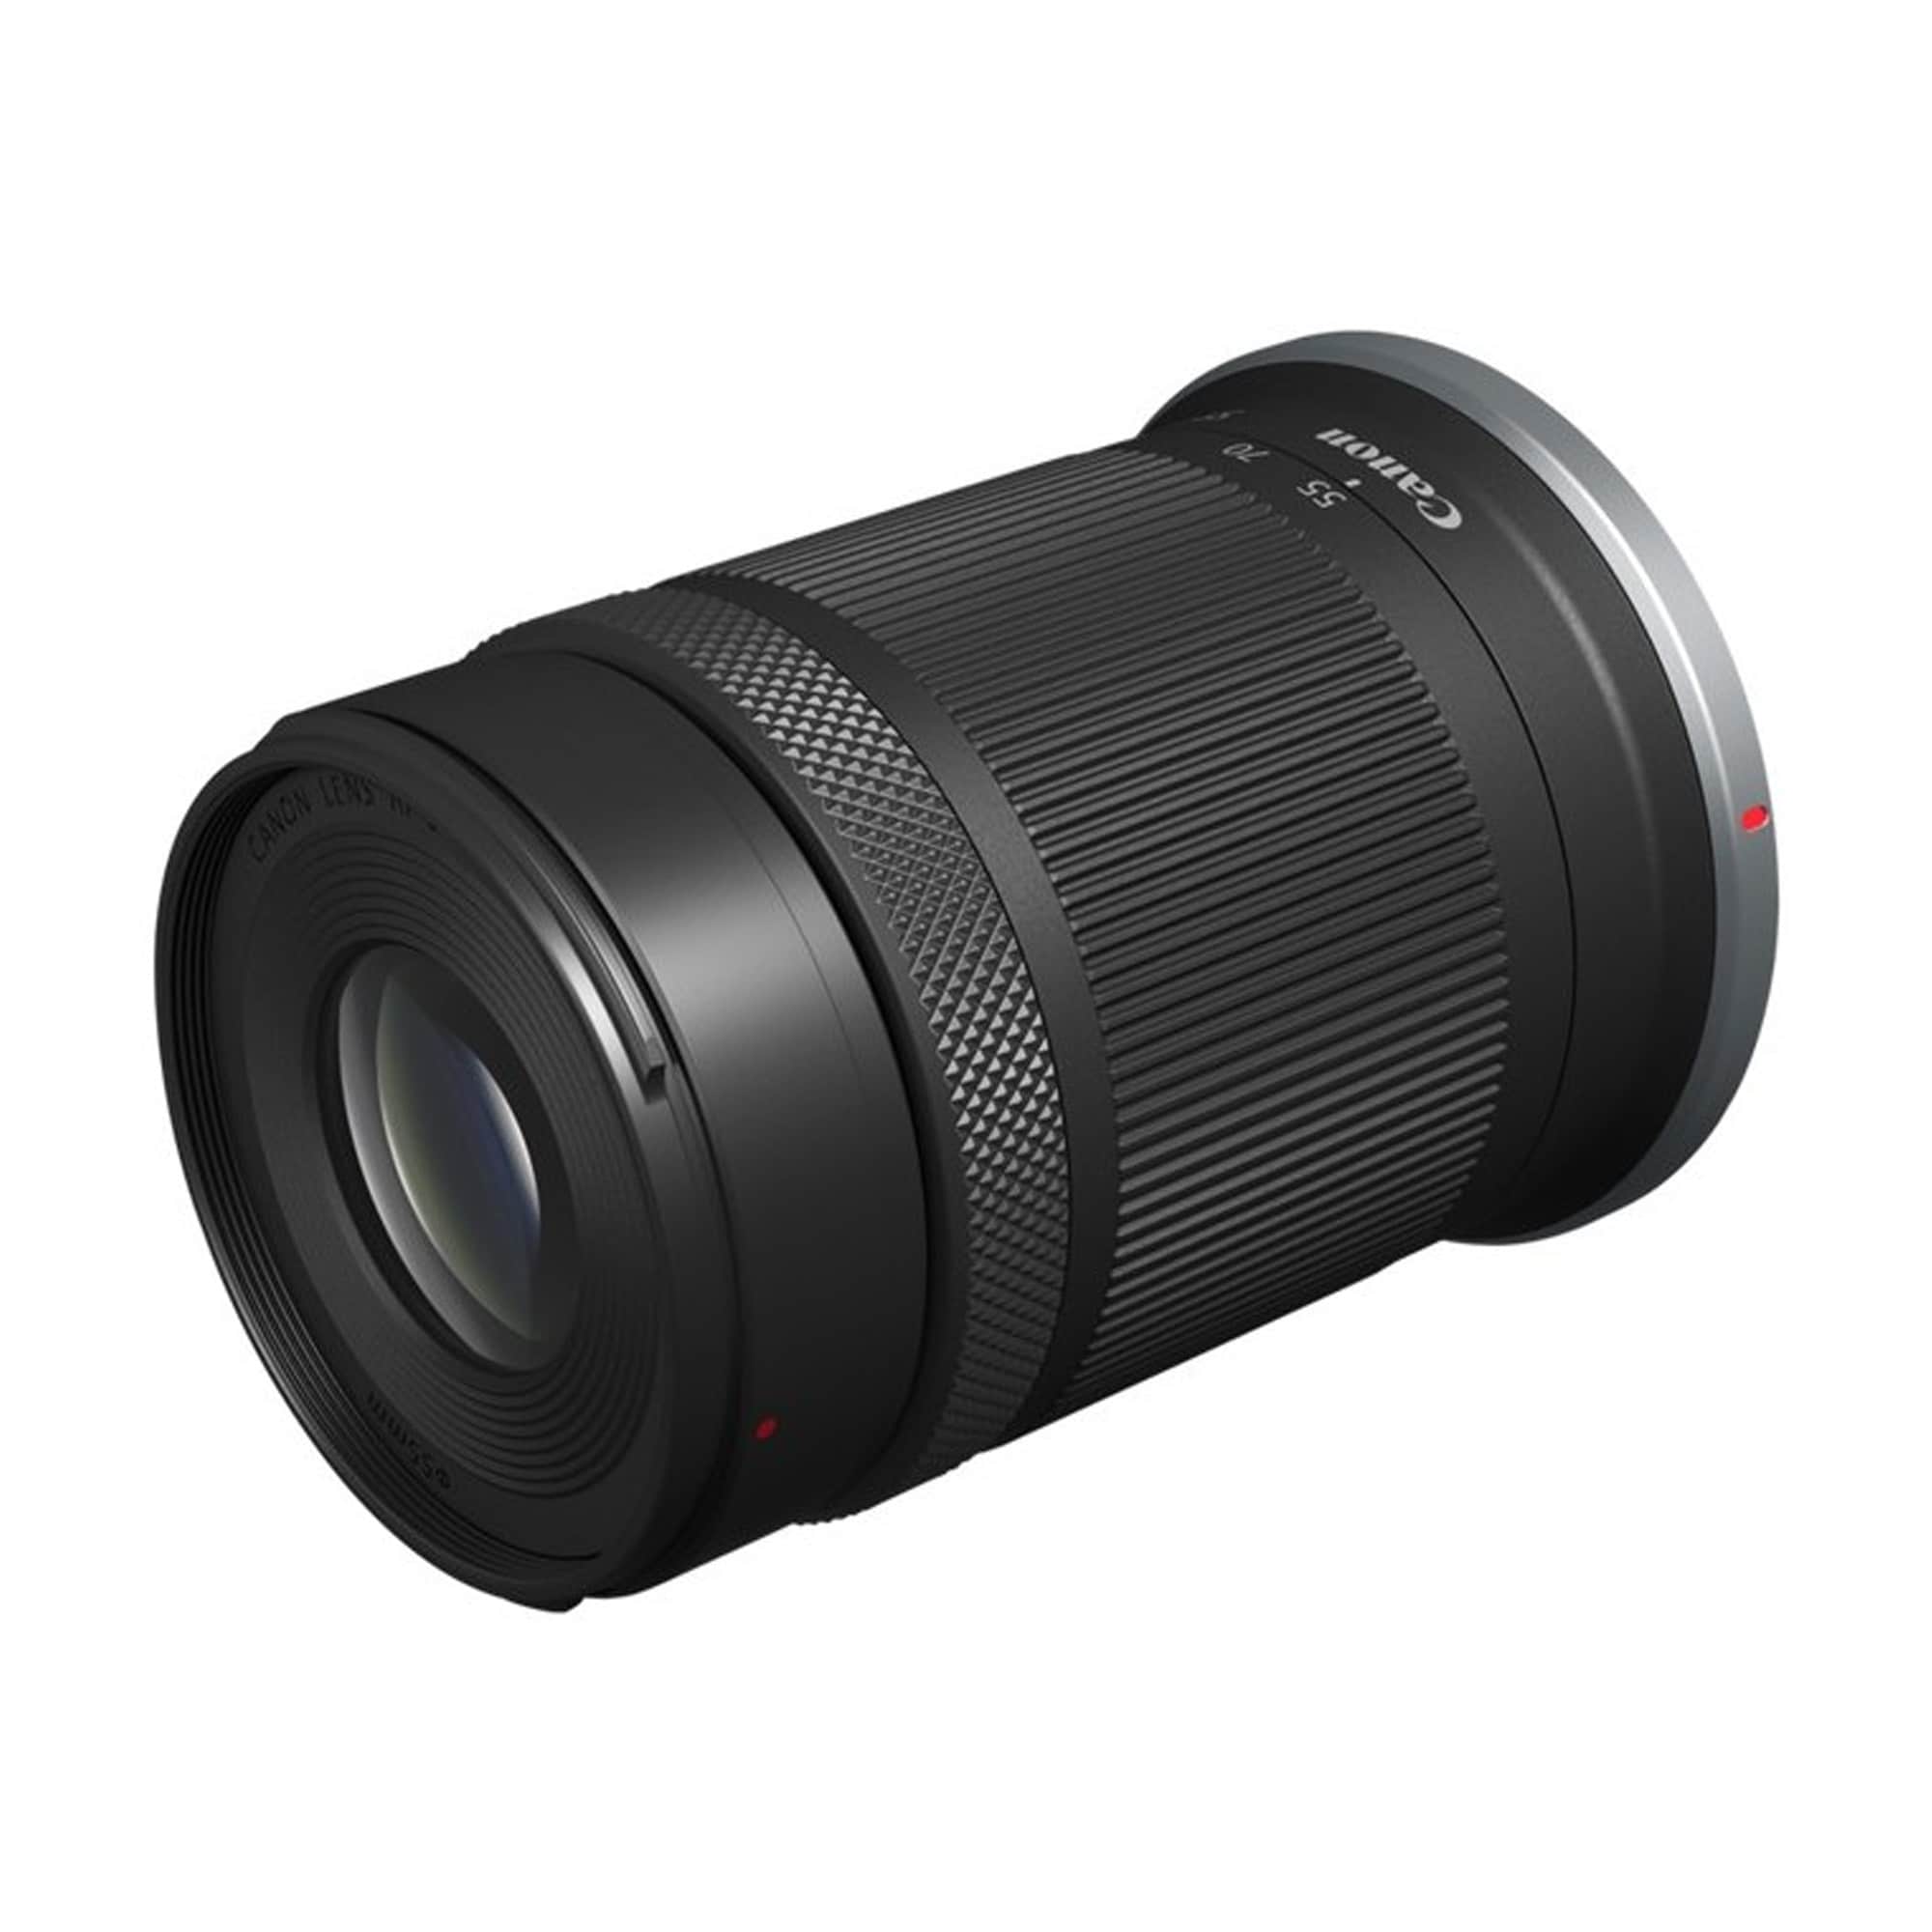 Canon RF-S 55-210mm f5-7,1 IS STM